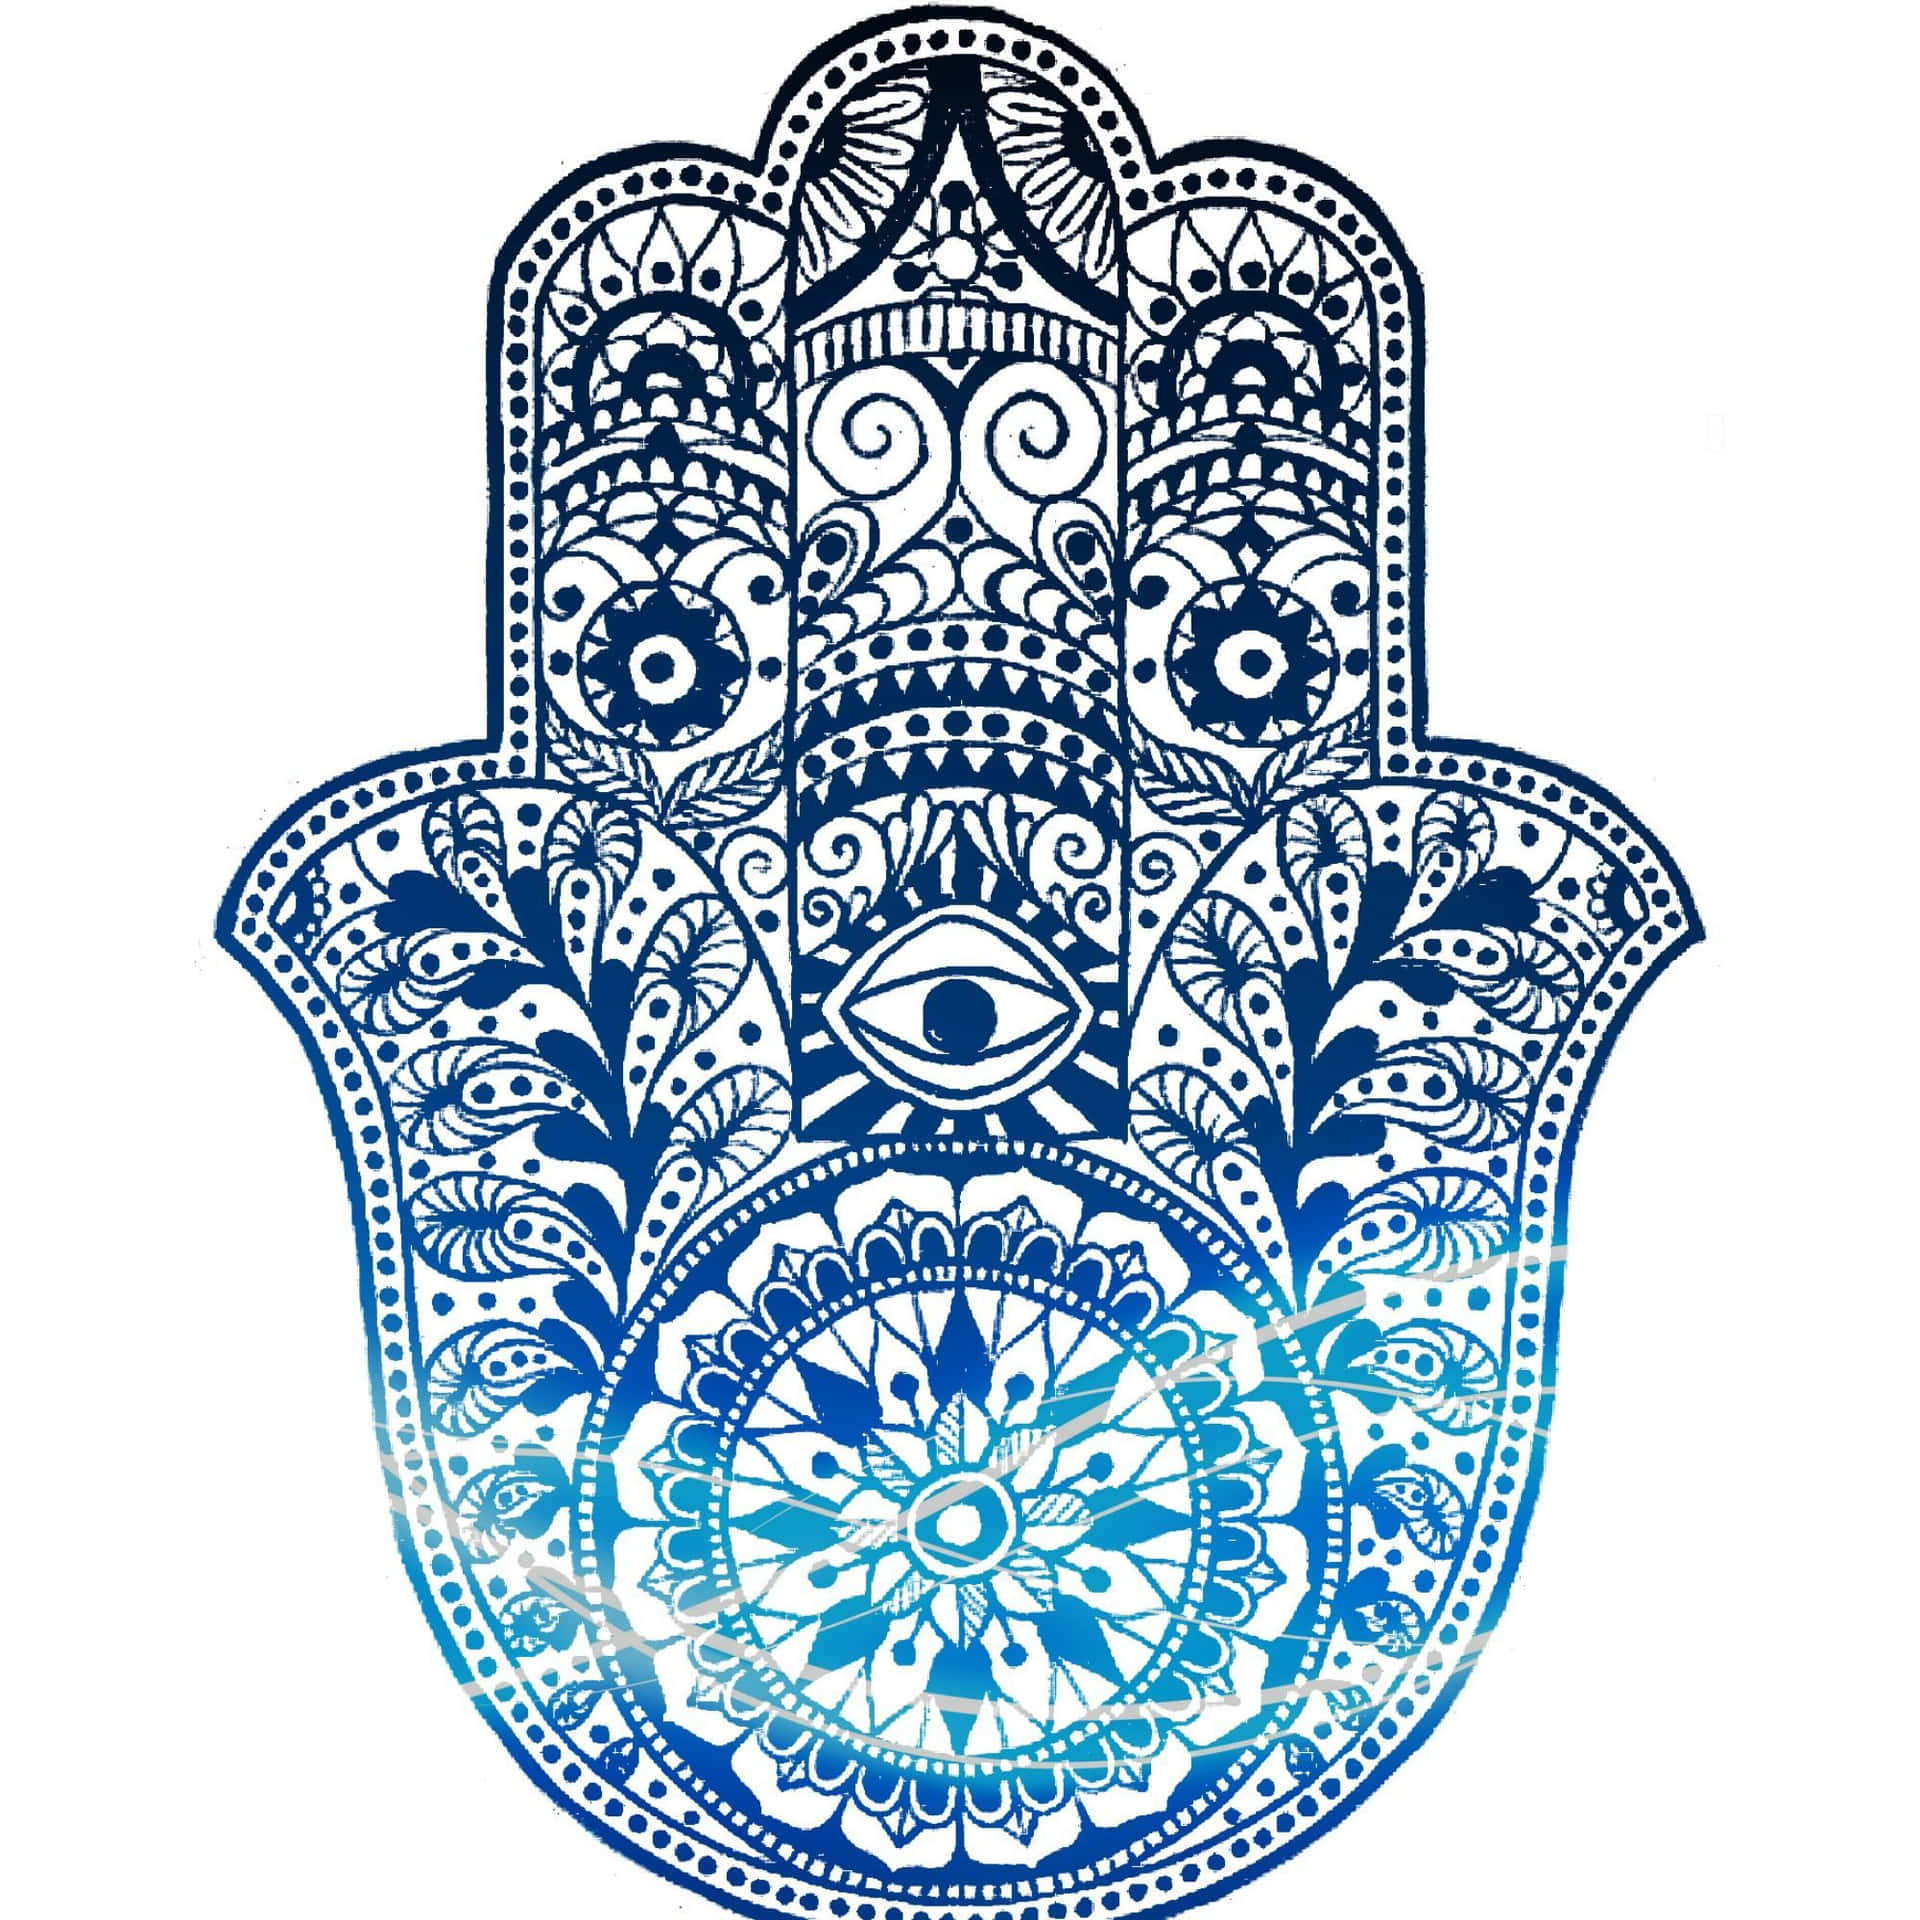 Hamsa Hand With Blue And White Designs Wallpaper